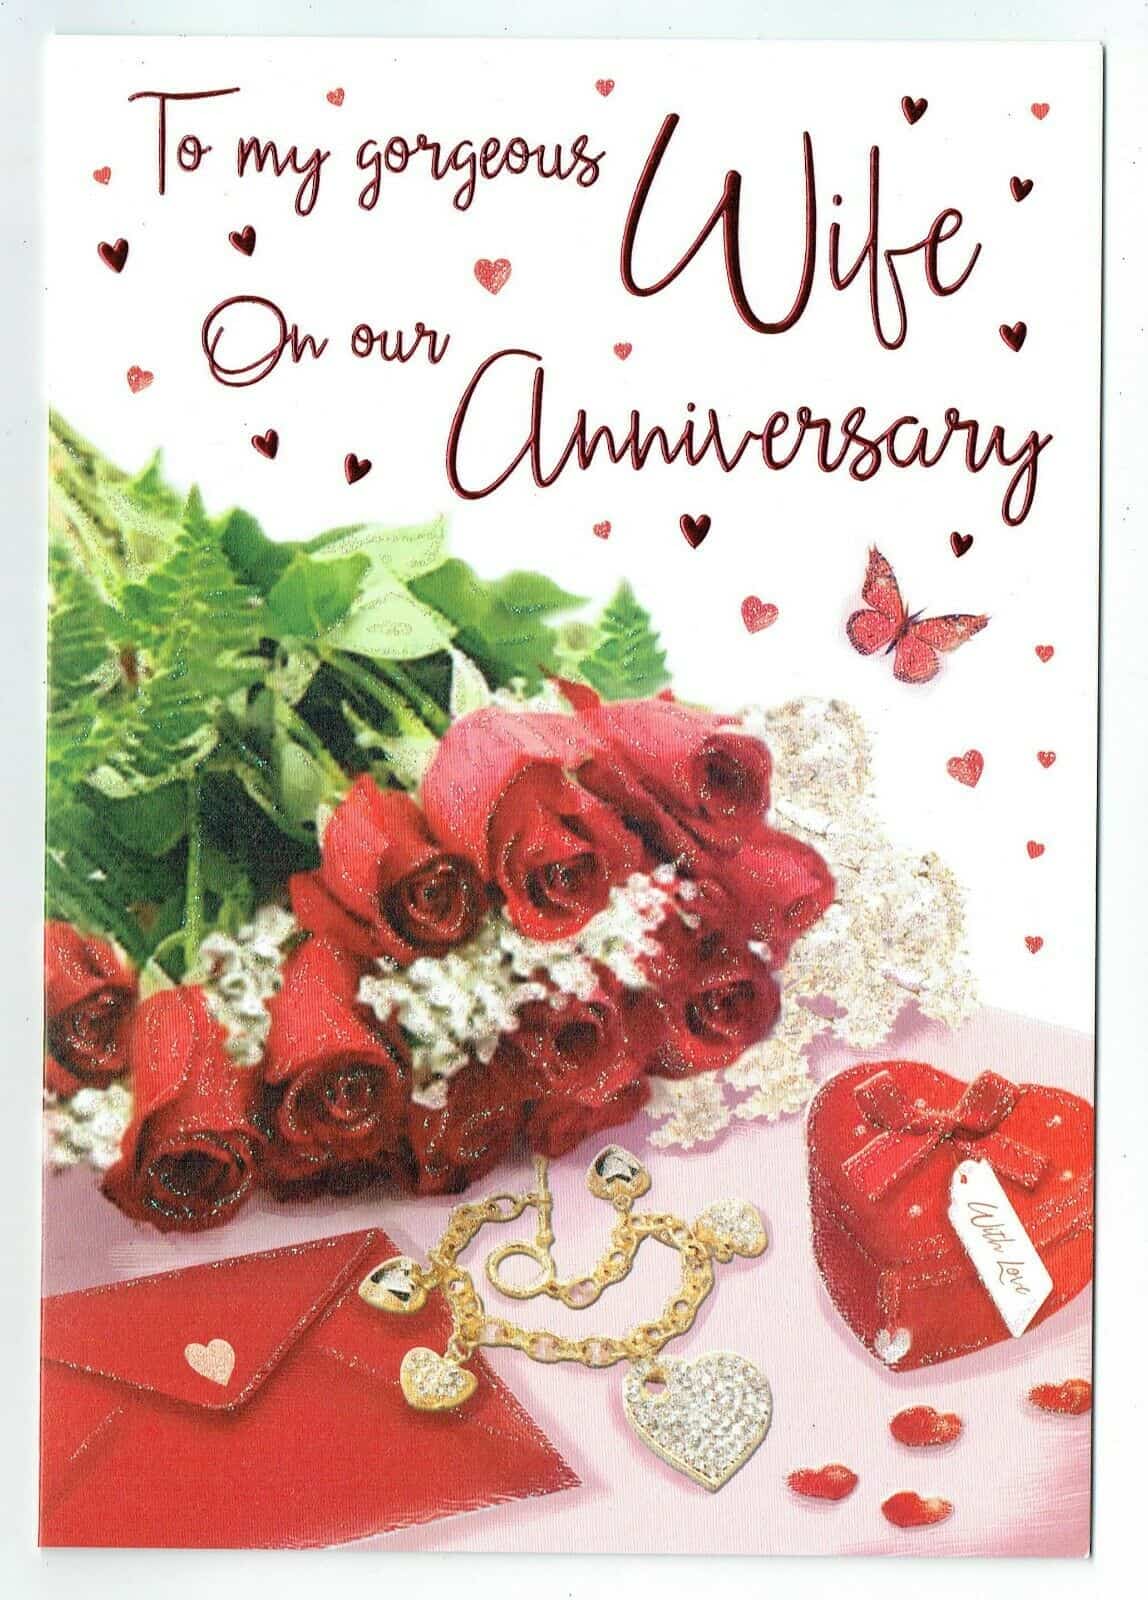 Wife Anniversary Card With Red Roses 'To My Gorgeous Wife